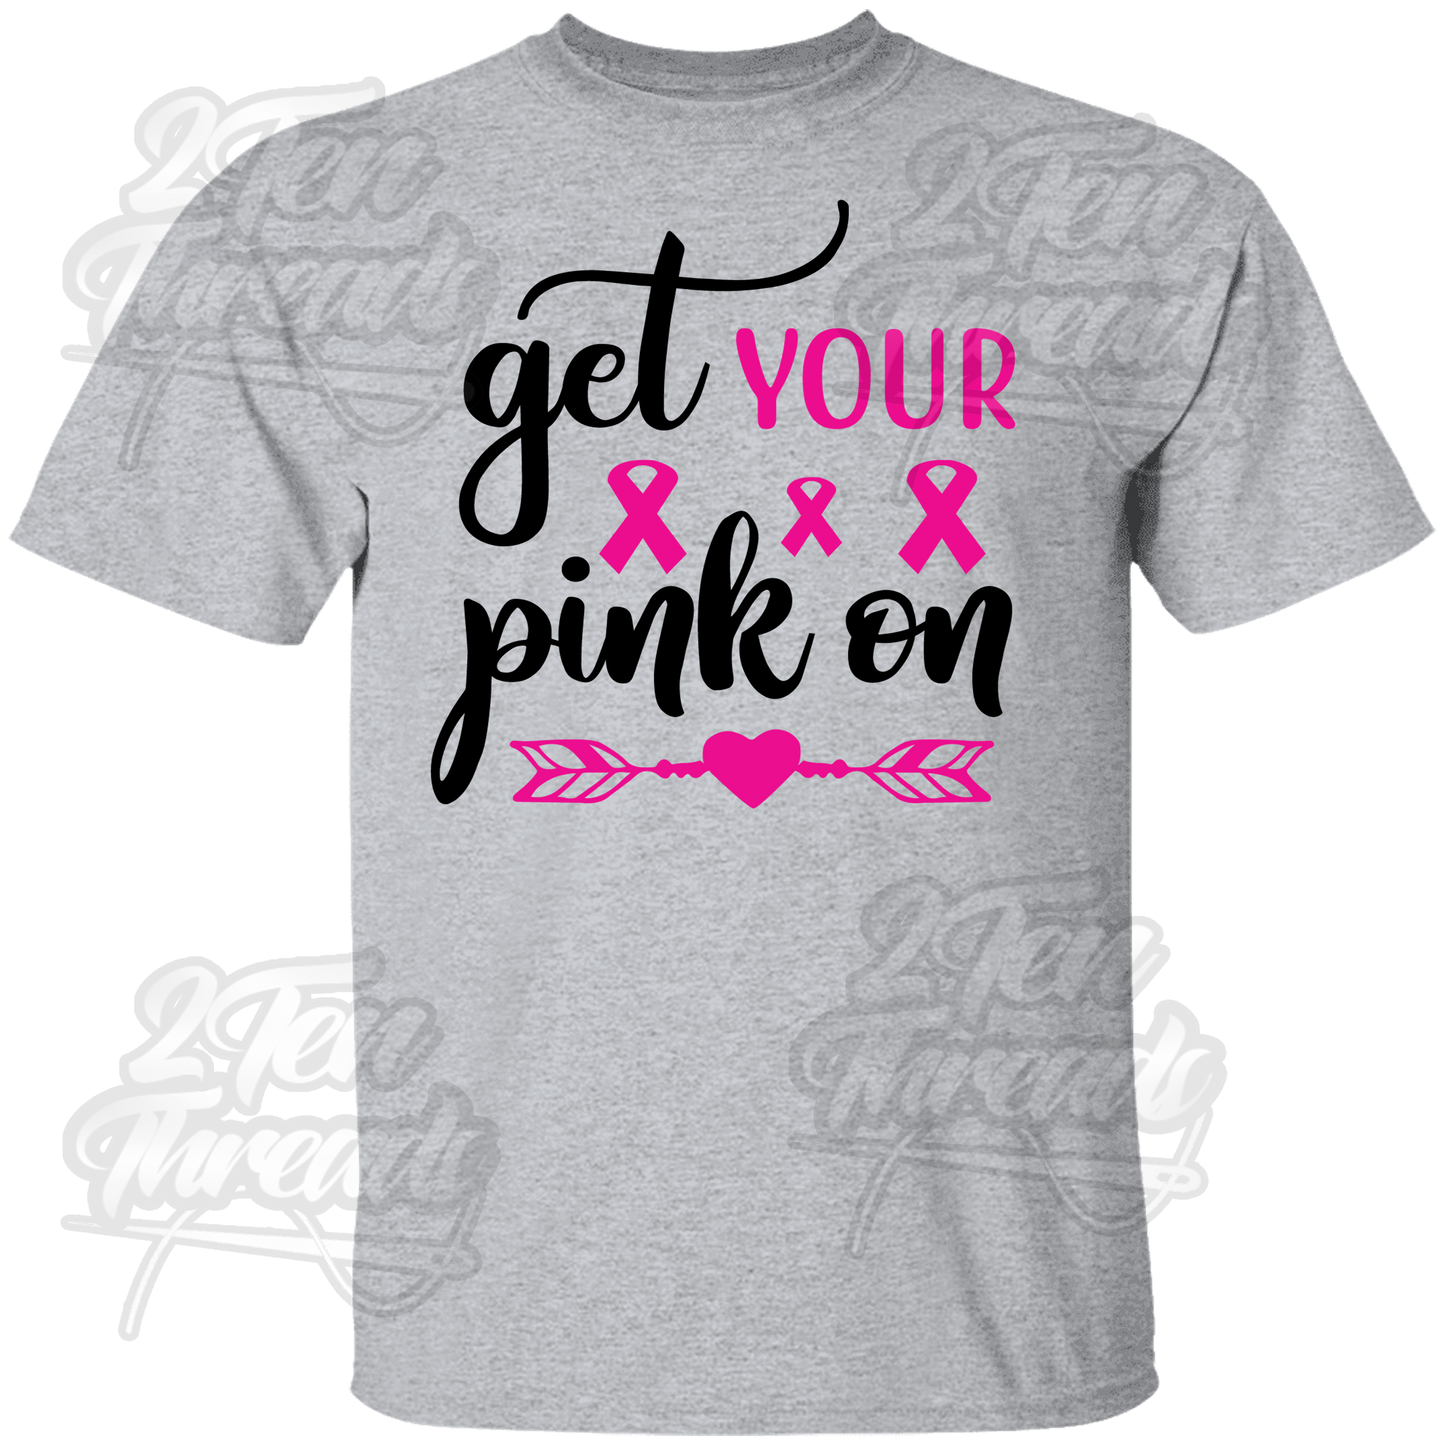 Get your Pink on Shirt